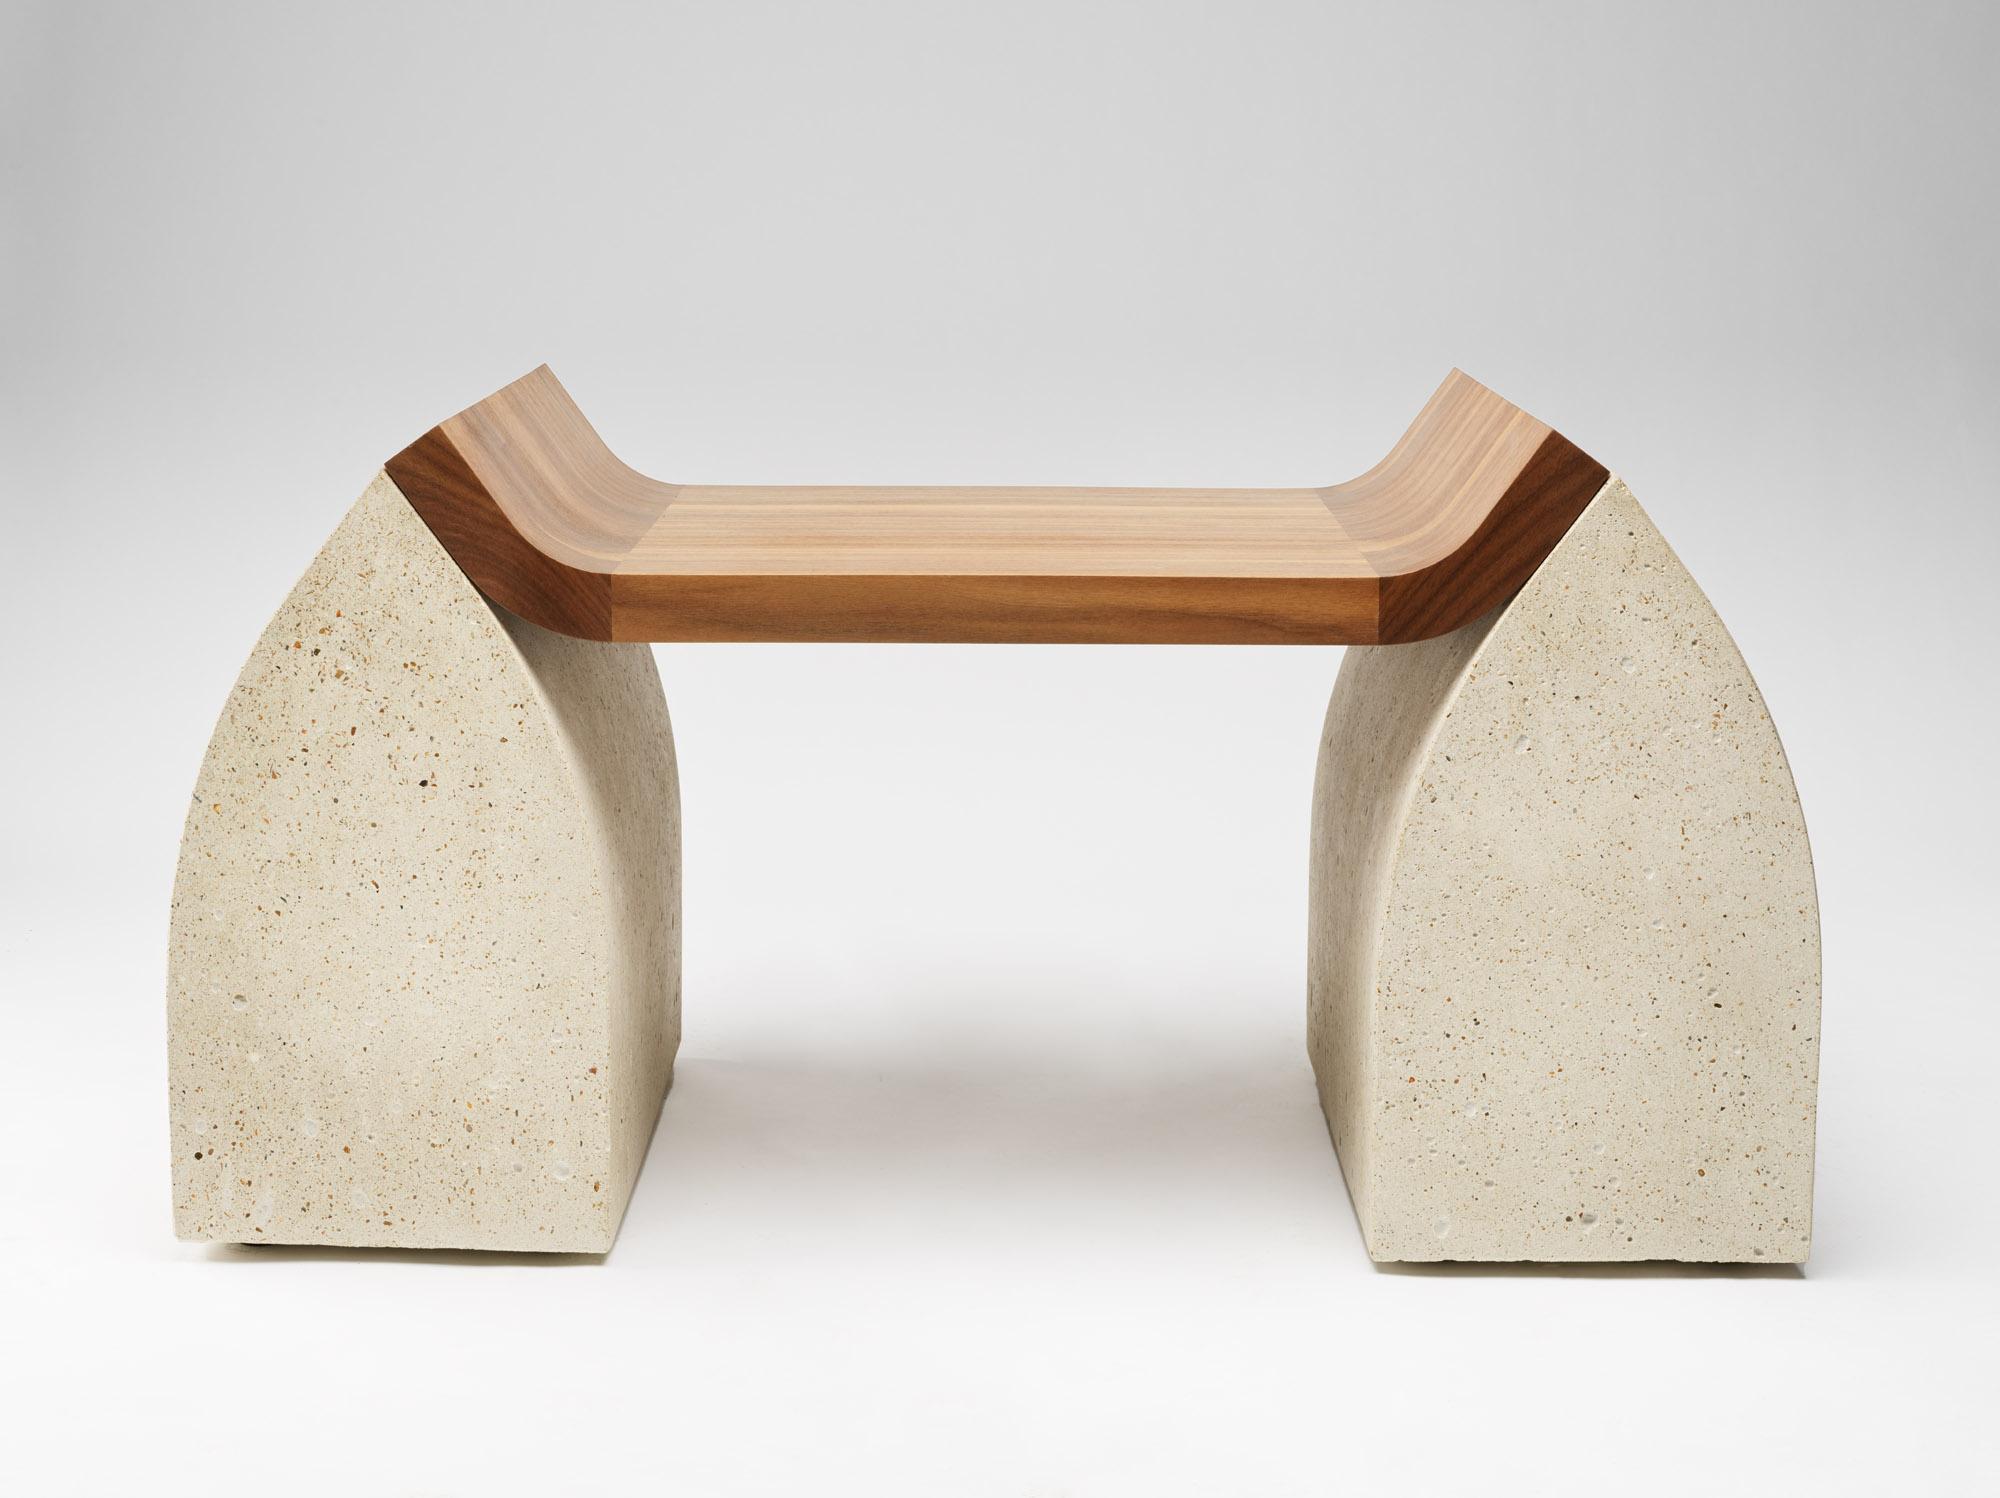 Large Walnut Traaf Bench by Tim Vranken
Materials: American Walnut, Granito Stone
Dimensions: L205 x W50 x H46 cm

Tim Vranken is a Belgian furniture designer who focuses on solid, handmade furniture. Throughout his designs, the use of pure